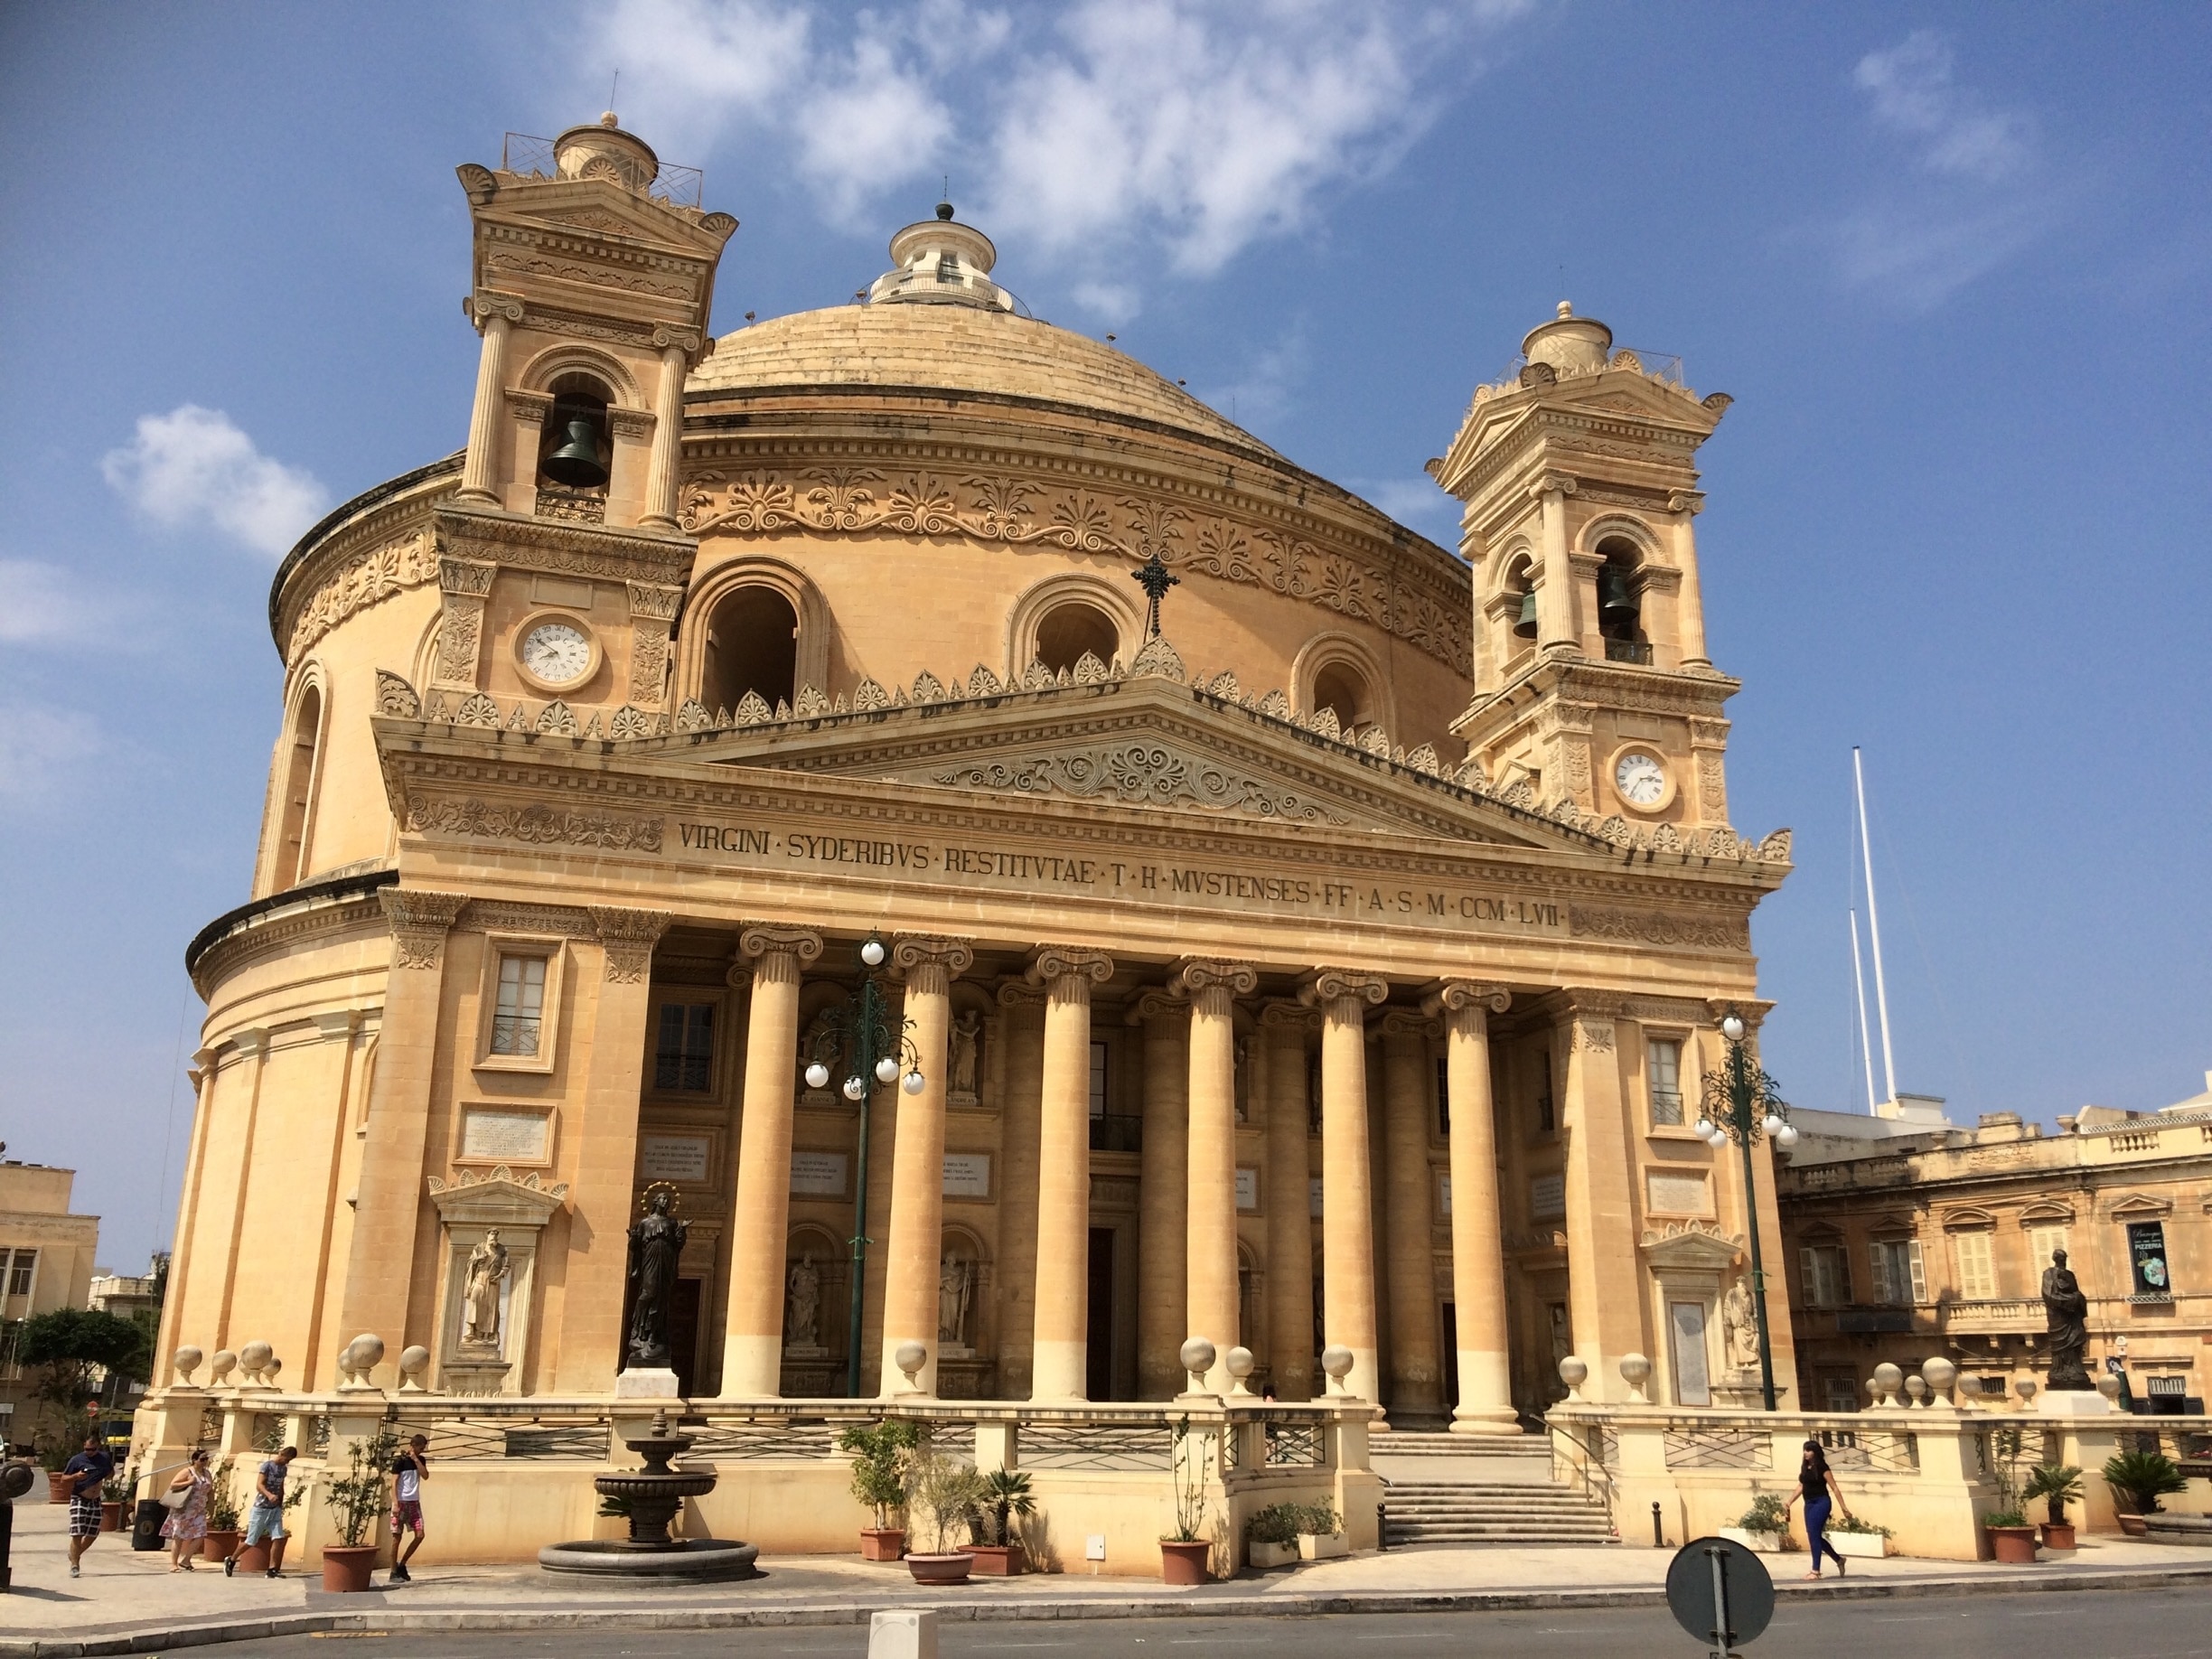 The amazing Mosta dome in Malta, the 5th biggest dome in Europe! Amazing place and even more amazing inside! 